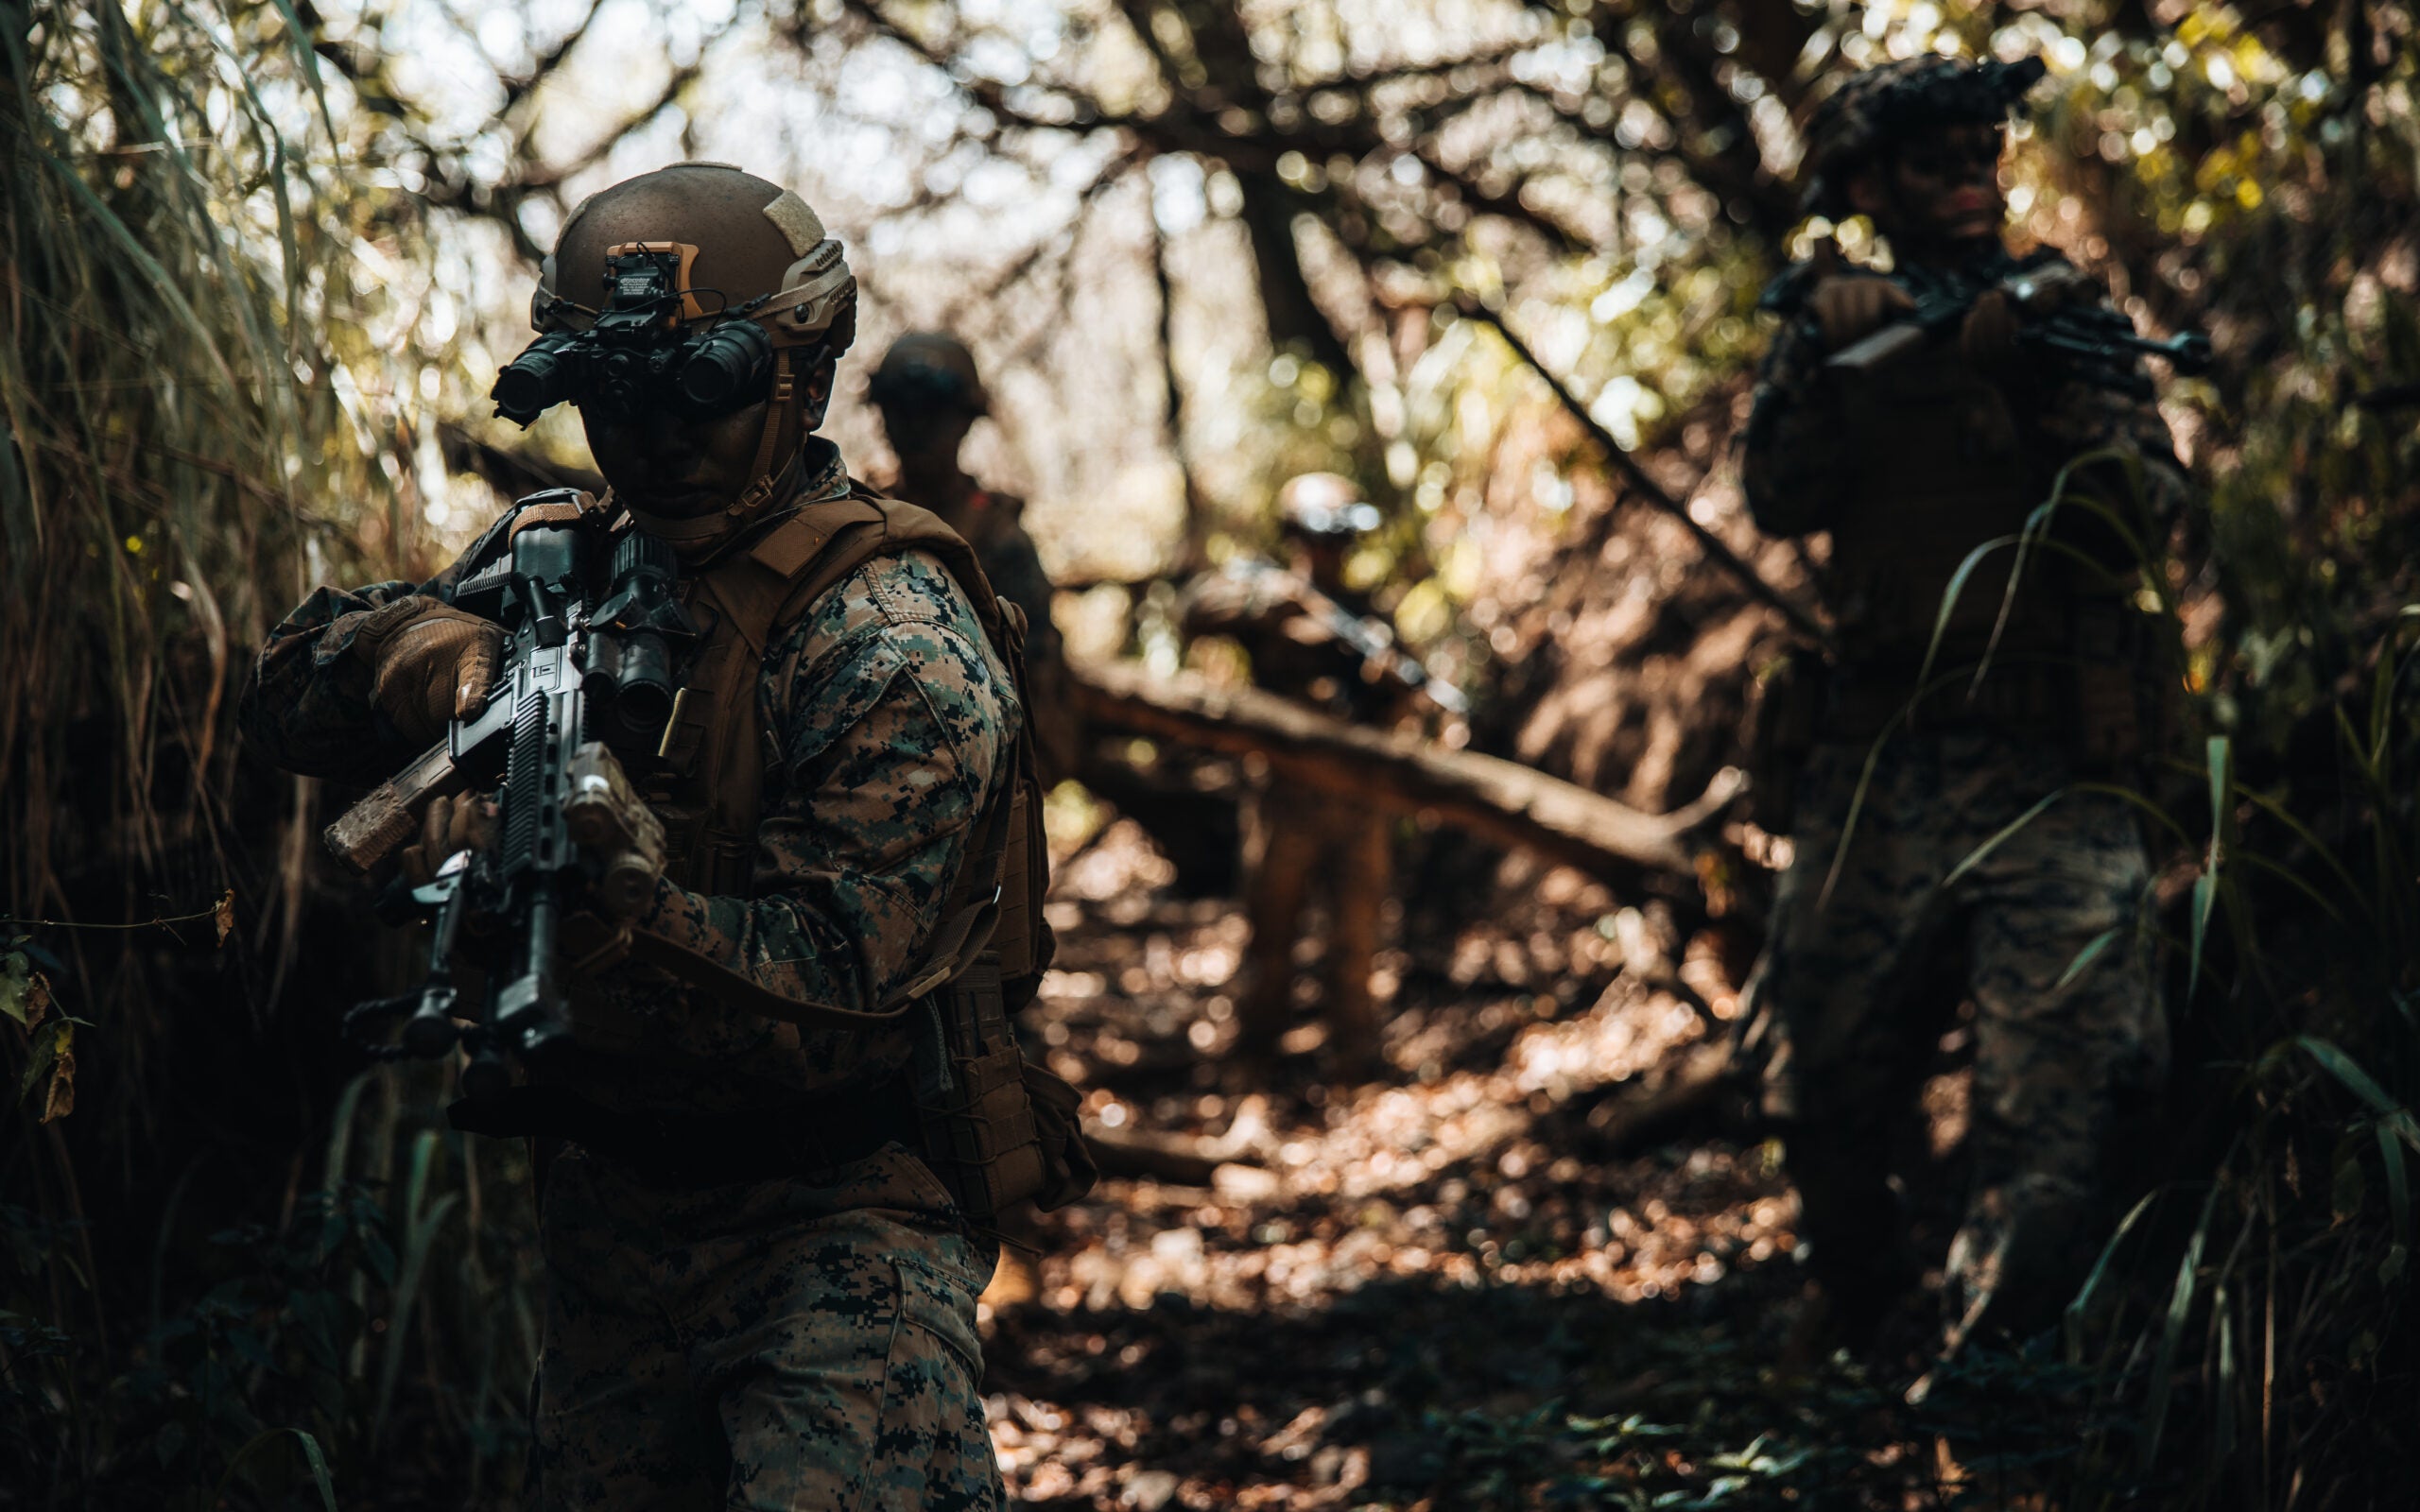 U.S. Marines with 3d Littoral Combat Team, 3d Marine Littoral Regiment, 3d Marine Division, conduct a combat patrol at Marine Corps Training Area Bellows, Hawaii, during Exercise Bougainville I, Aug. 17, 2022. Bougainville I allows fire teams and squads with 3d LCT to rehearse small unit cohesion, lethality, and survivability to set conditions for company offensive, defensive, and Expeditionary Advanced Base Operations during future exercises. (U.S. Marine Corps photo by Cpl. Patrick King)